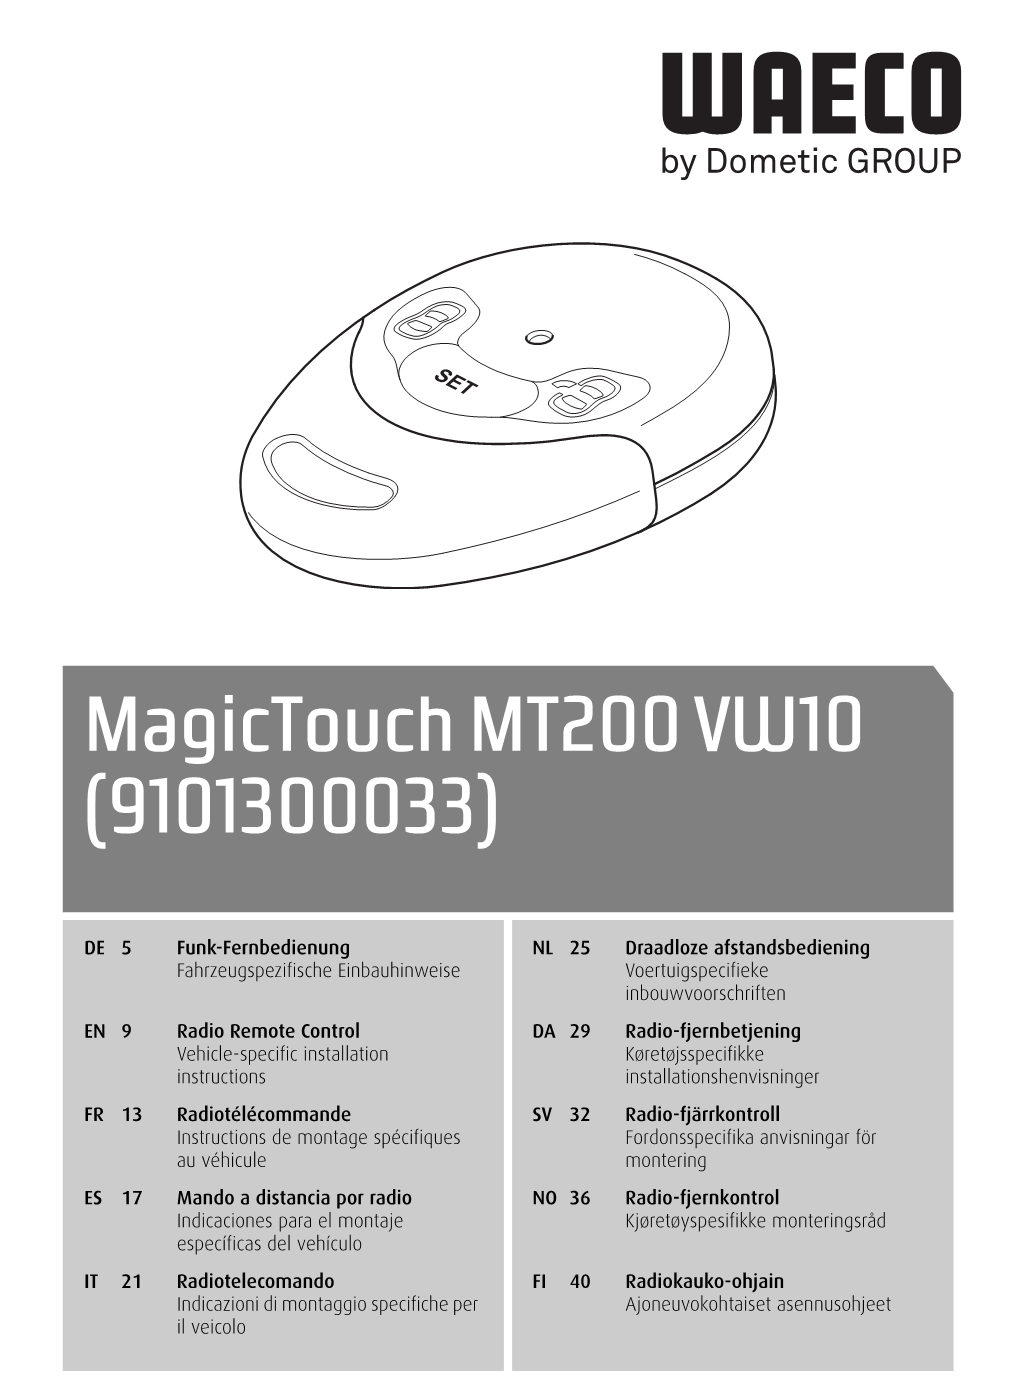 Magictouch MT200 VW10 (9101300033)